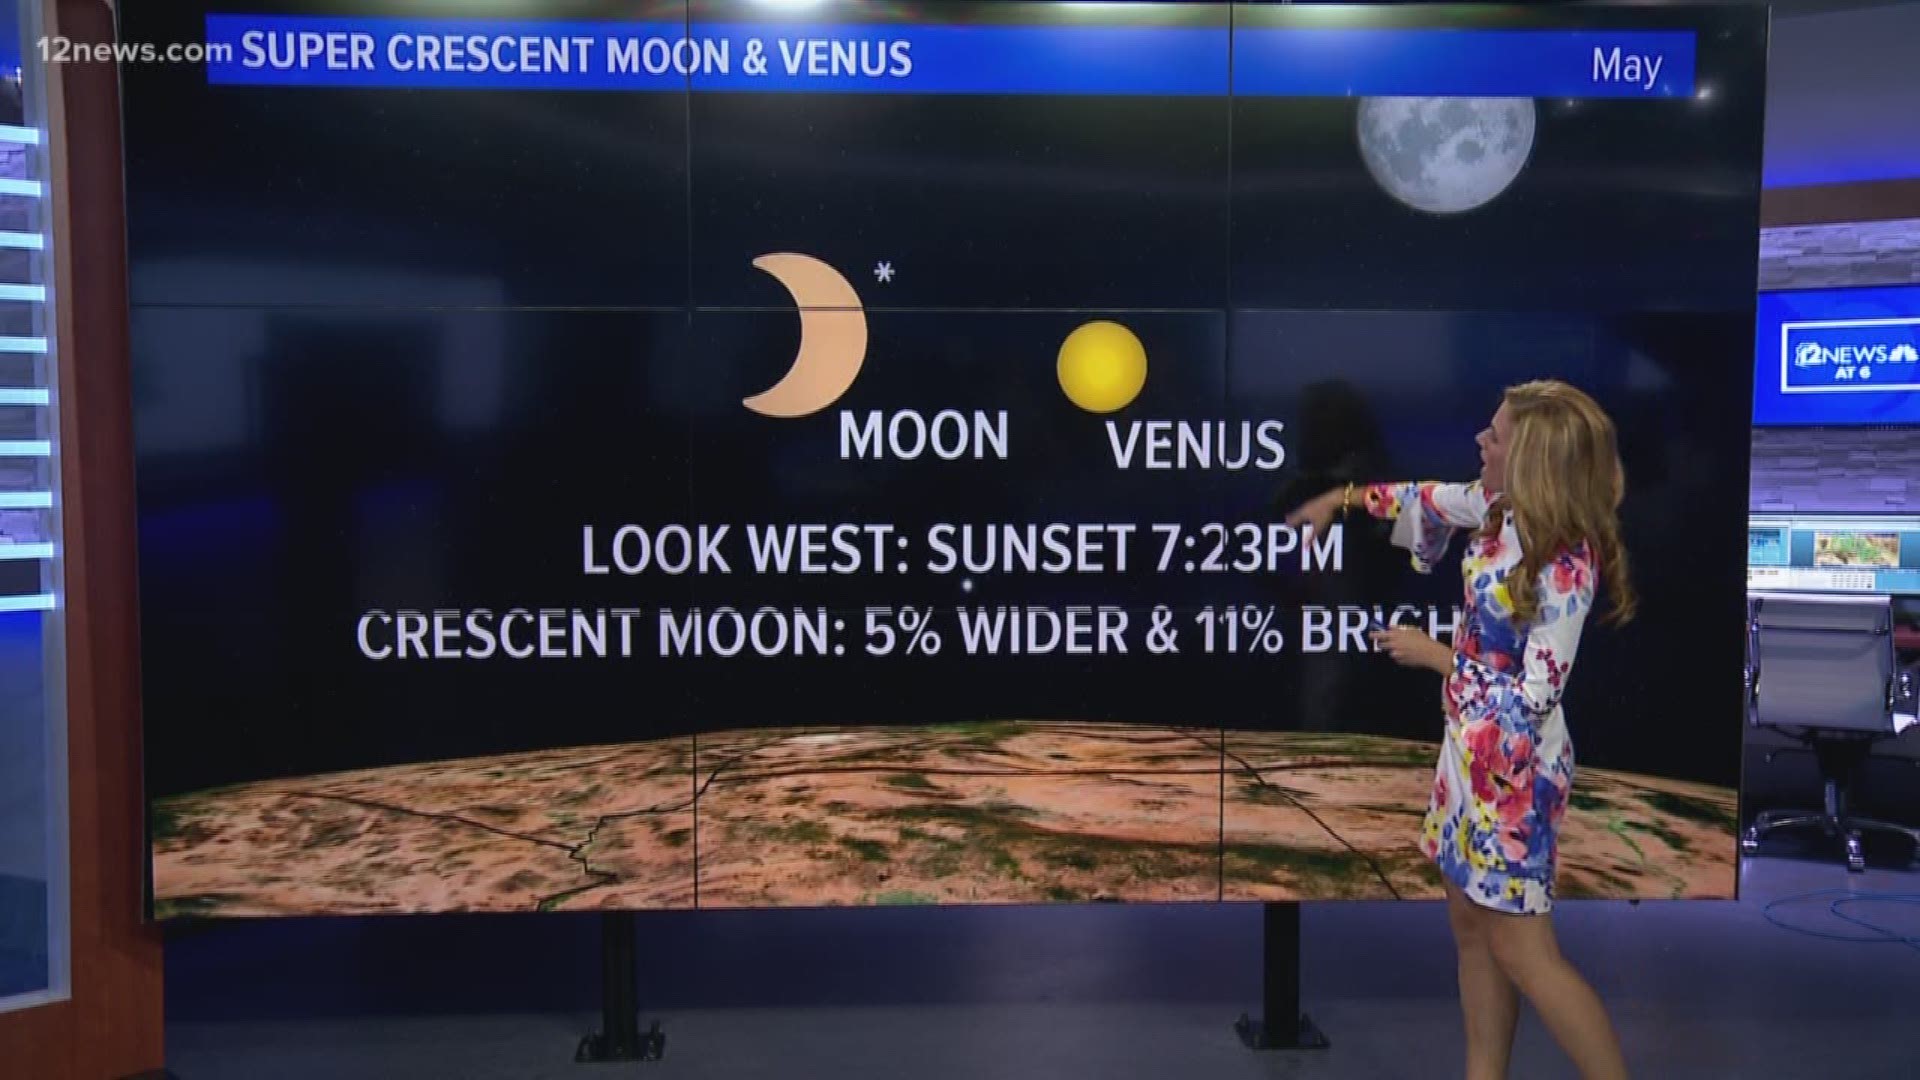 The super crescent moon and Venus are visible shortly after sunset tonight.